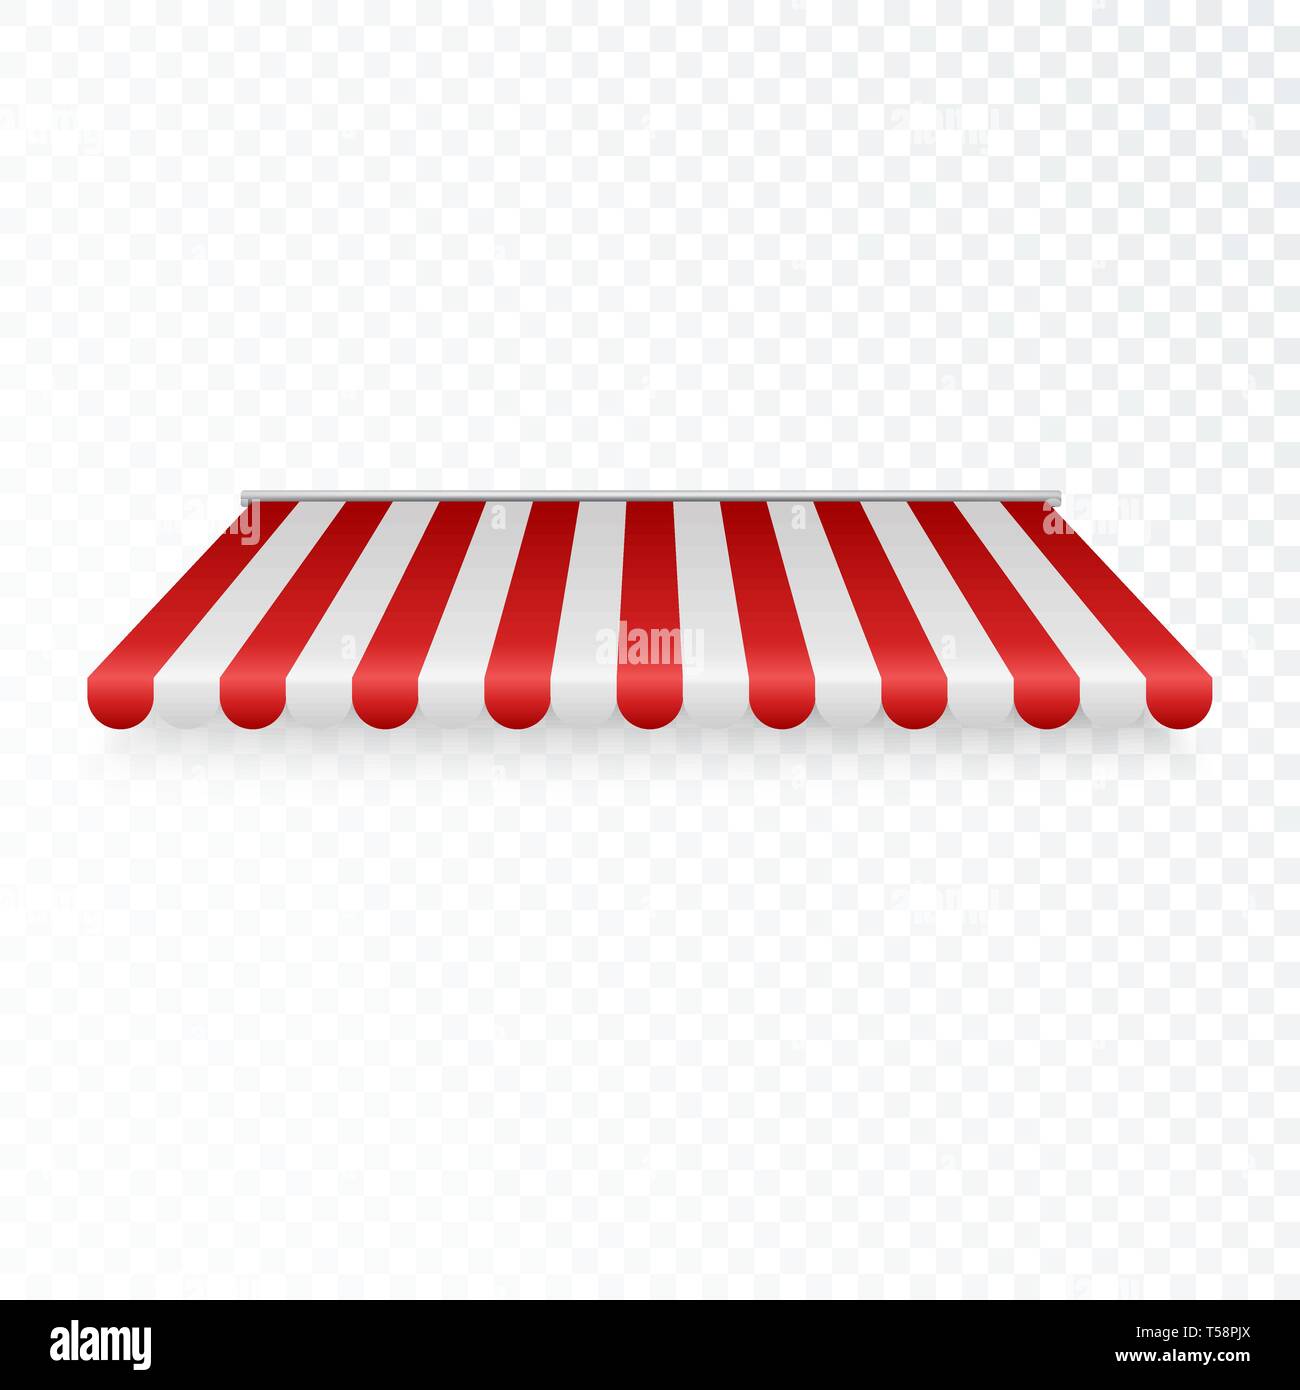 Outdoor awning. Striped tent or textile roof for retail shop. Red and white sunshade. Vector illustration Stock Vector